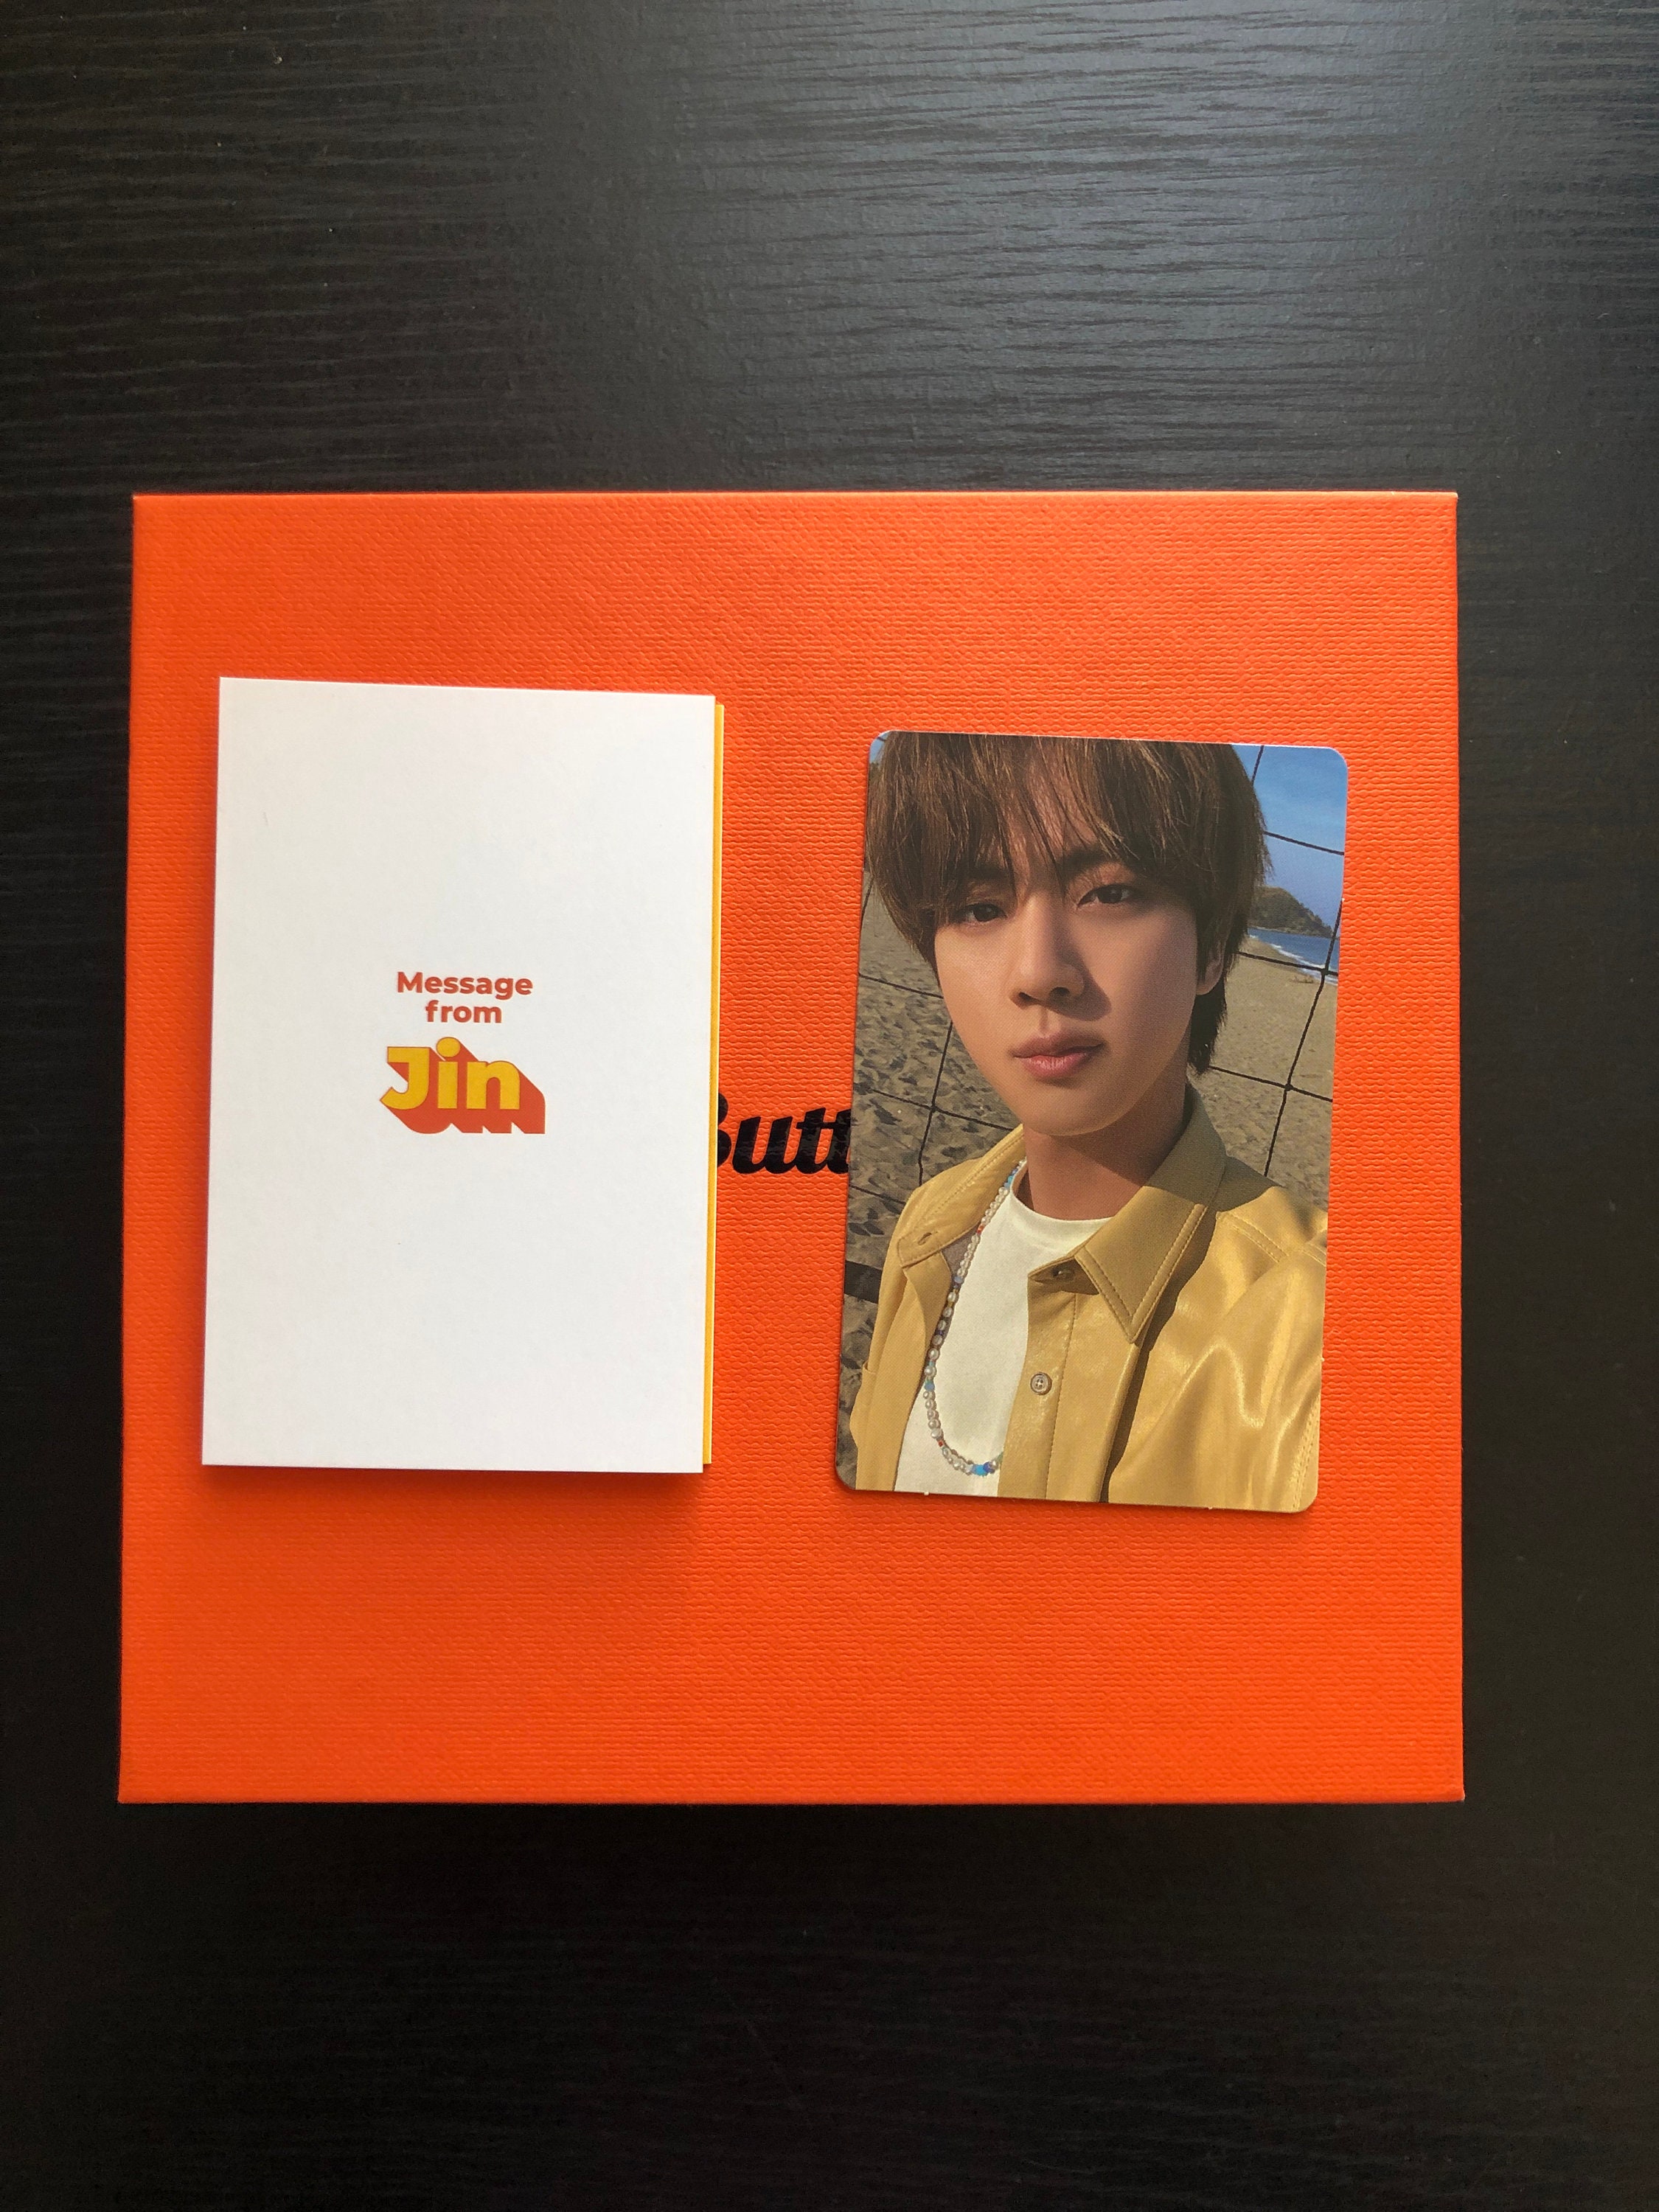 BUTTER ALBUM BTS Peaches Version Jungkook Jin Photocards | Etsy